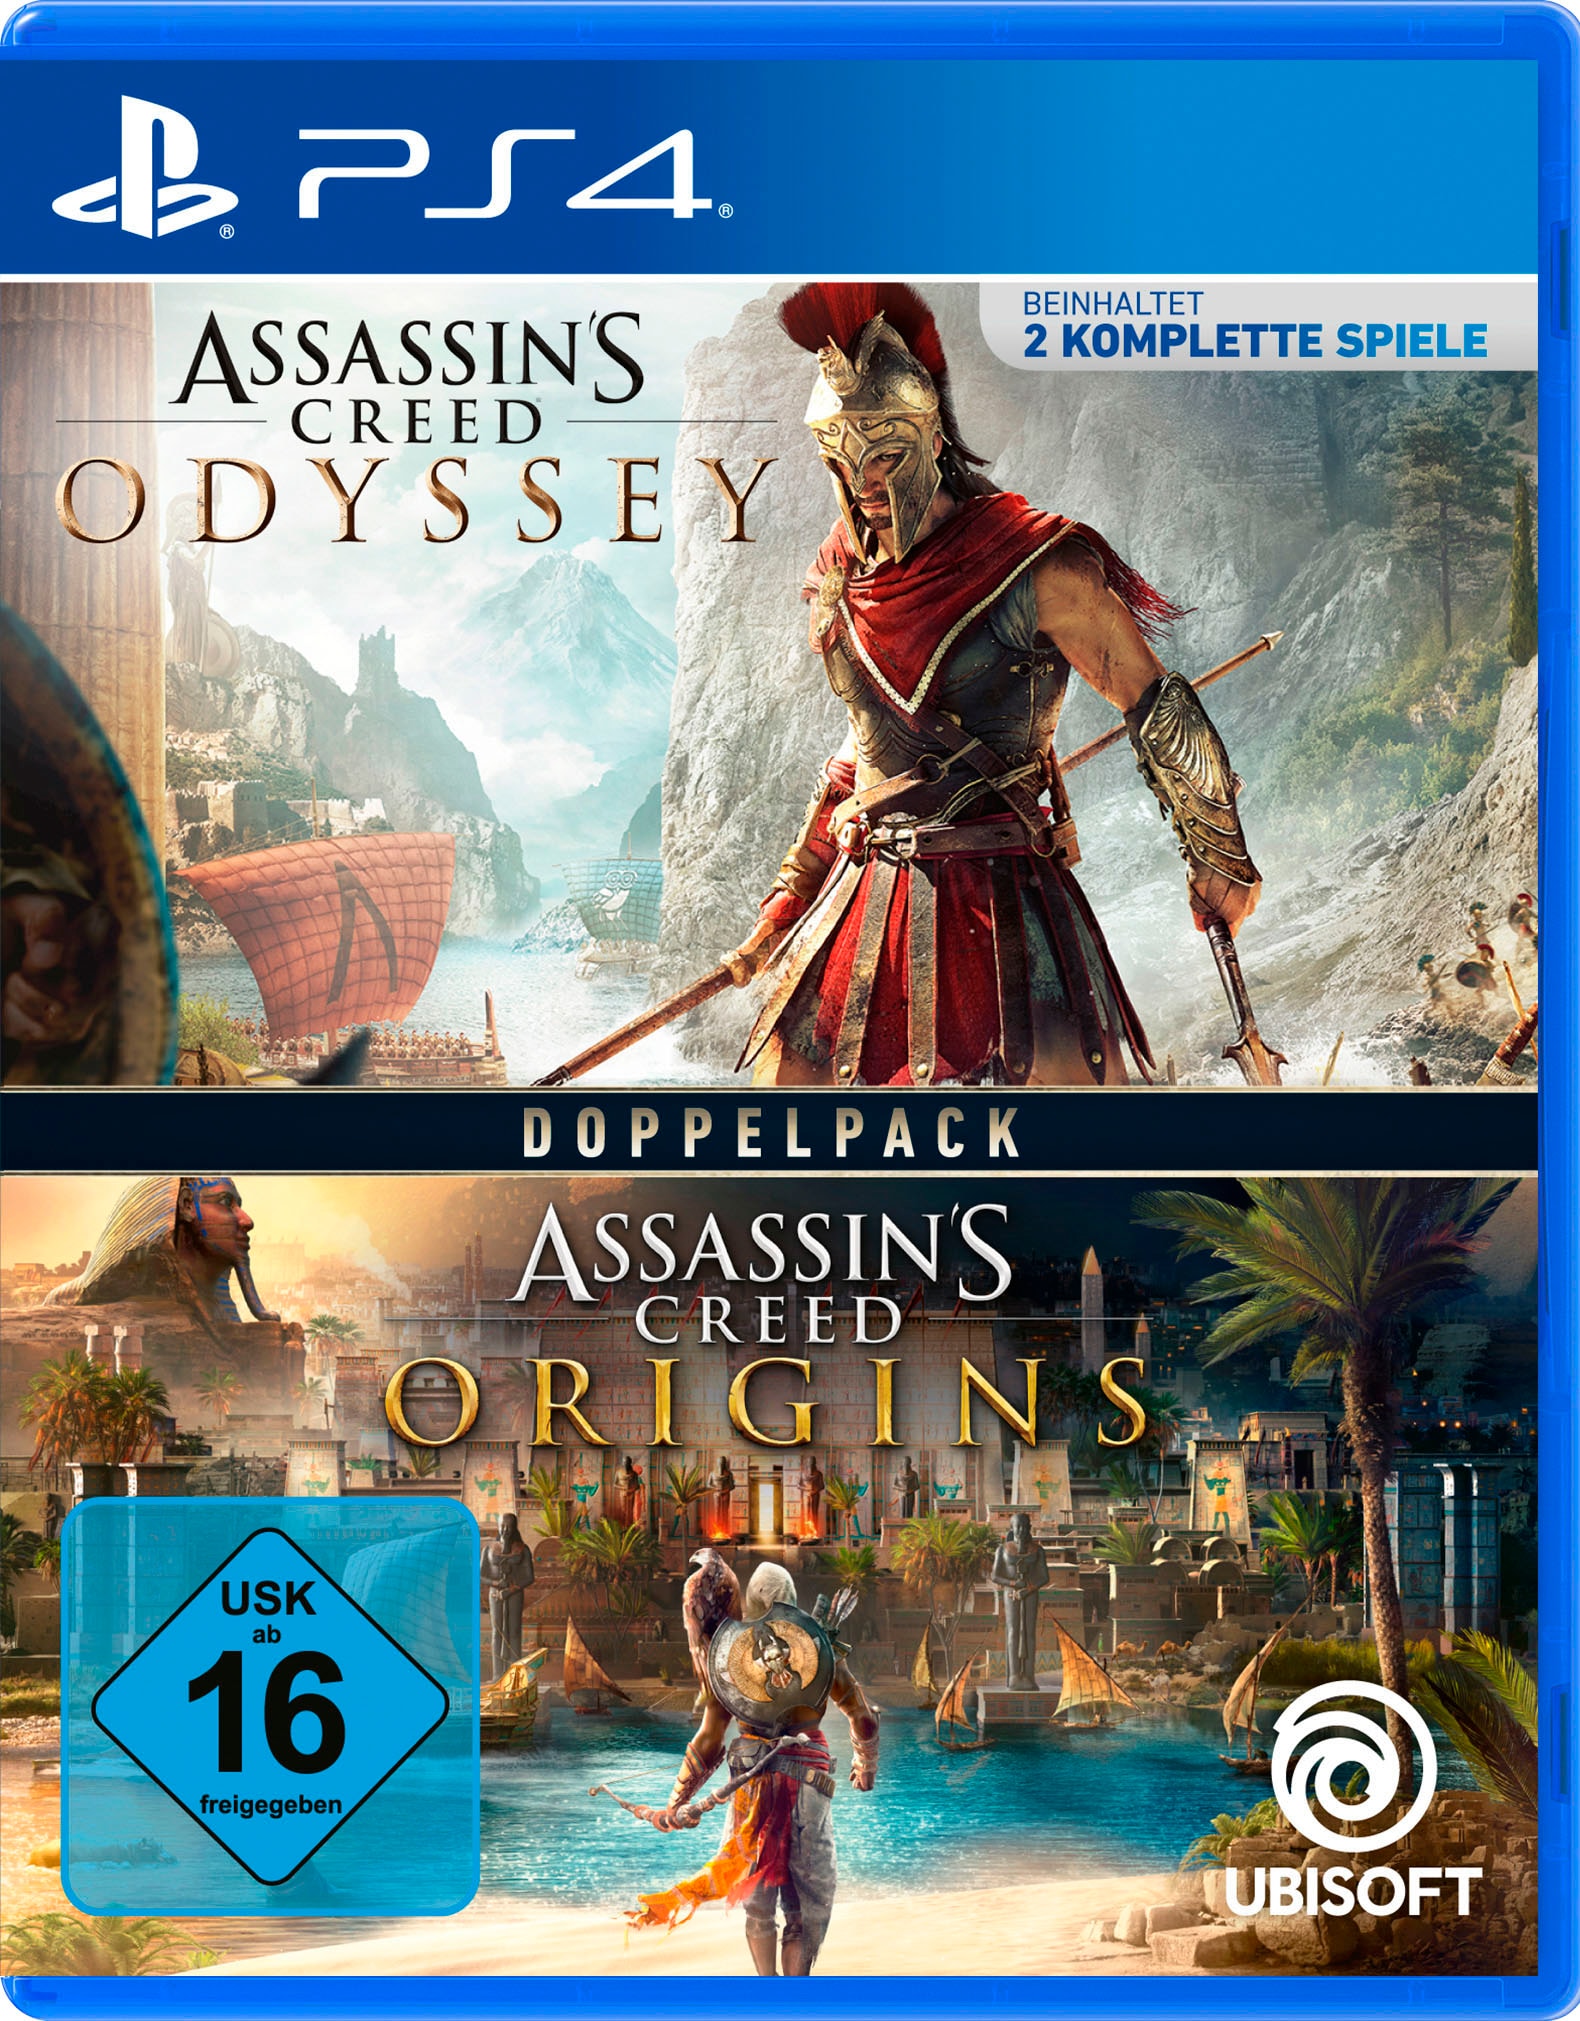 Spielesoftware »Assassin's Creed Odyssey + Origins Double Pack«, PlayStation 4